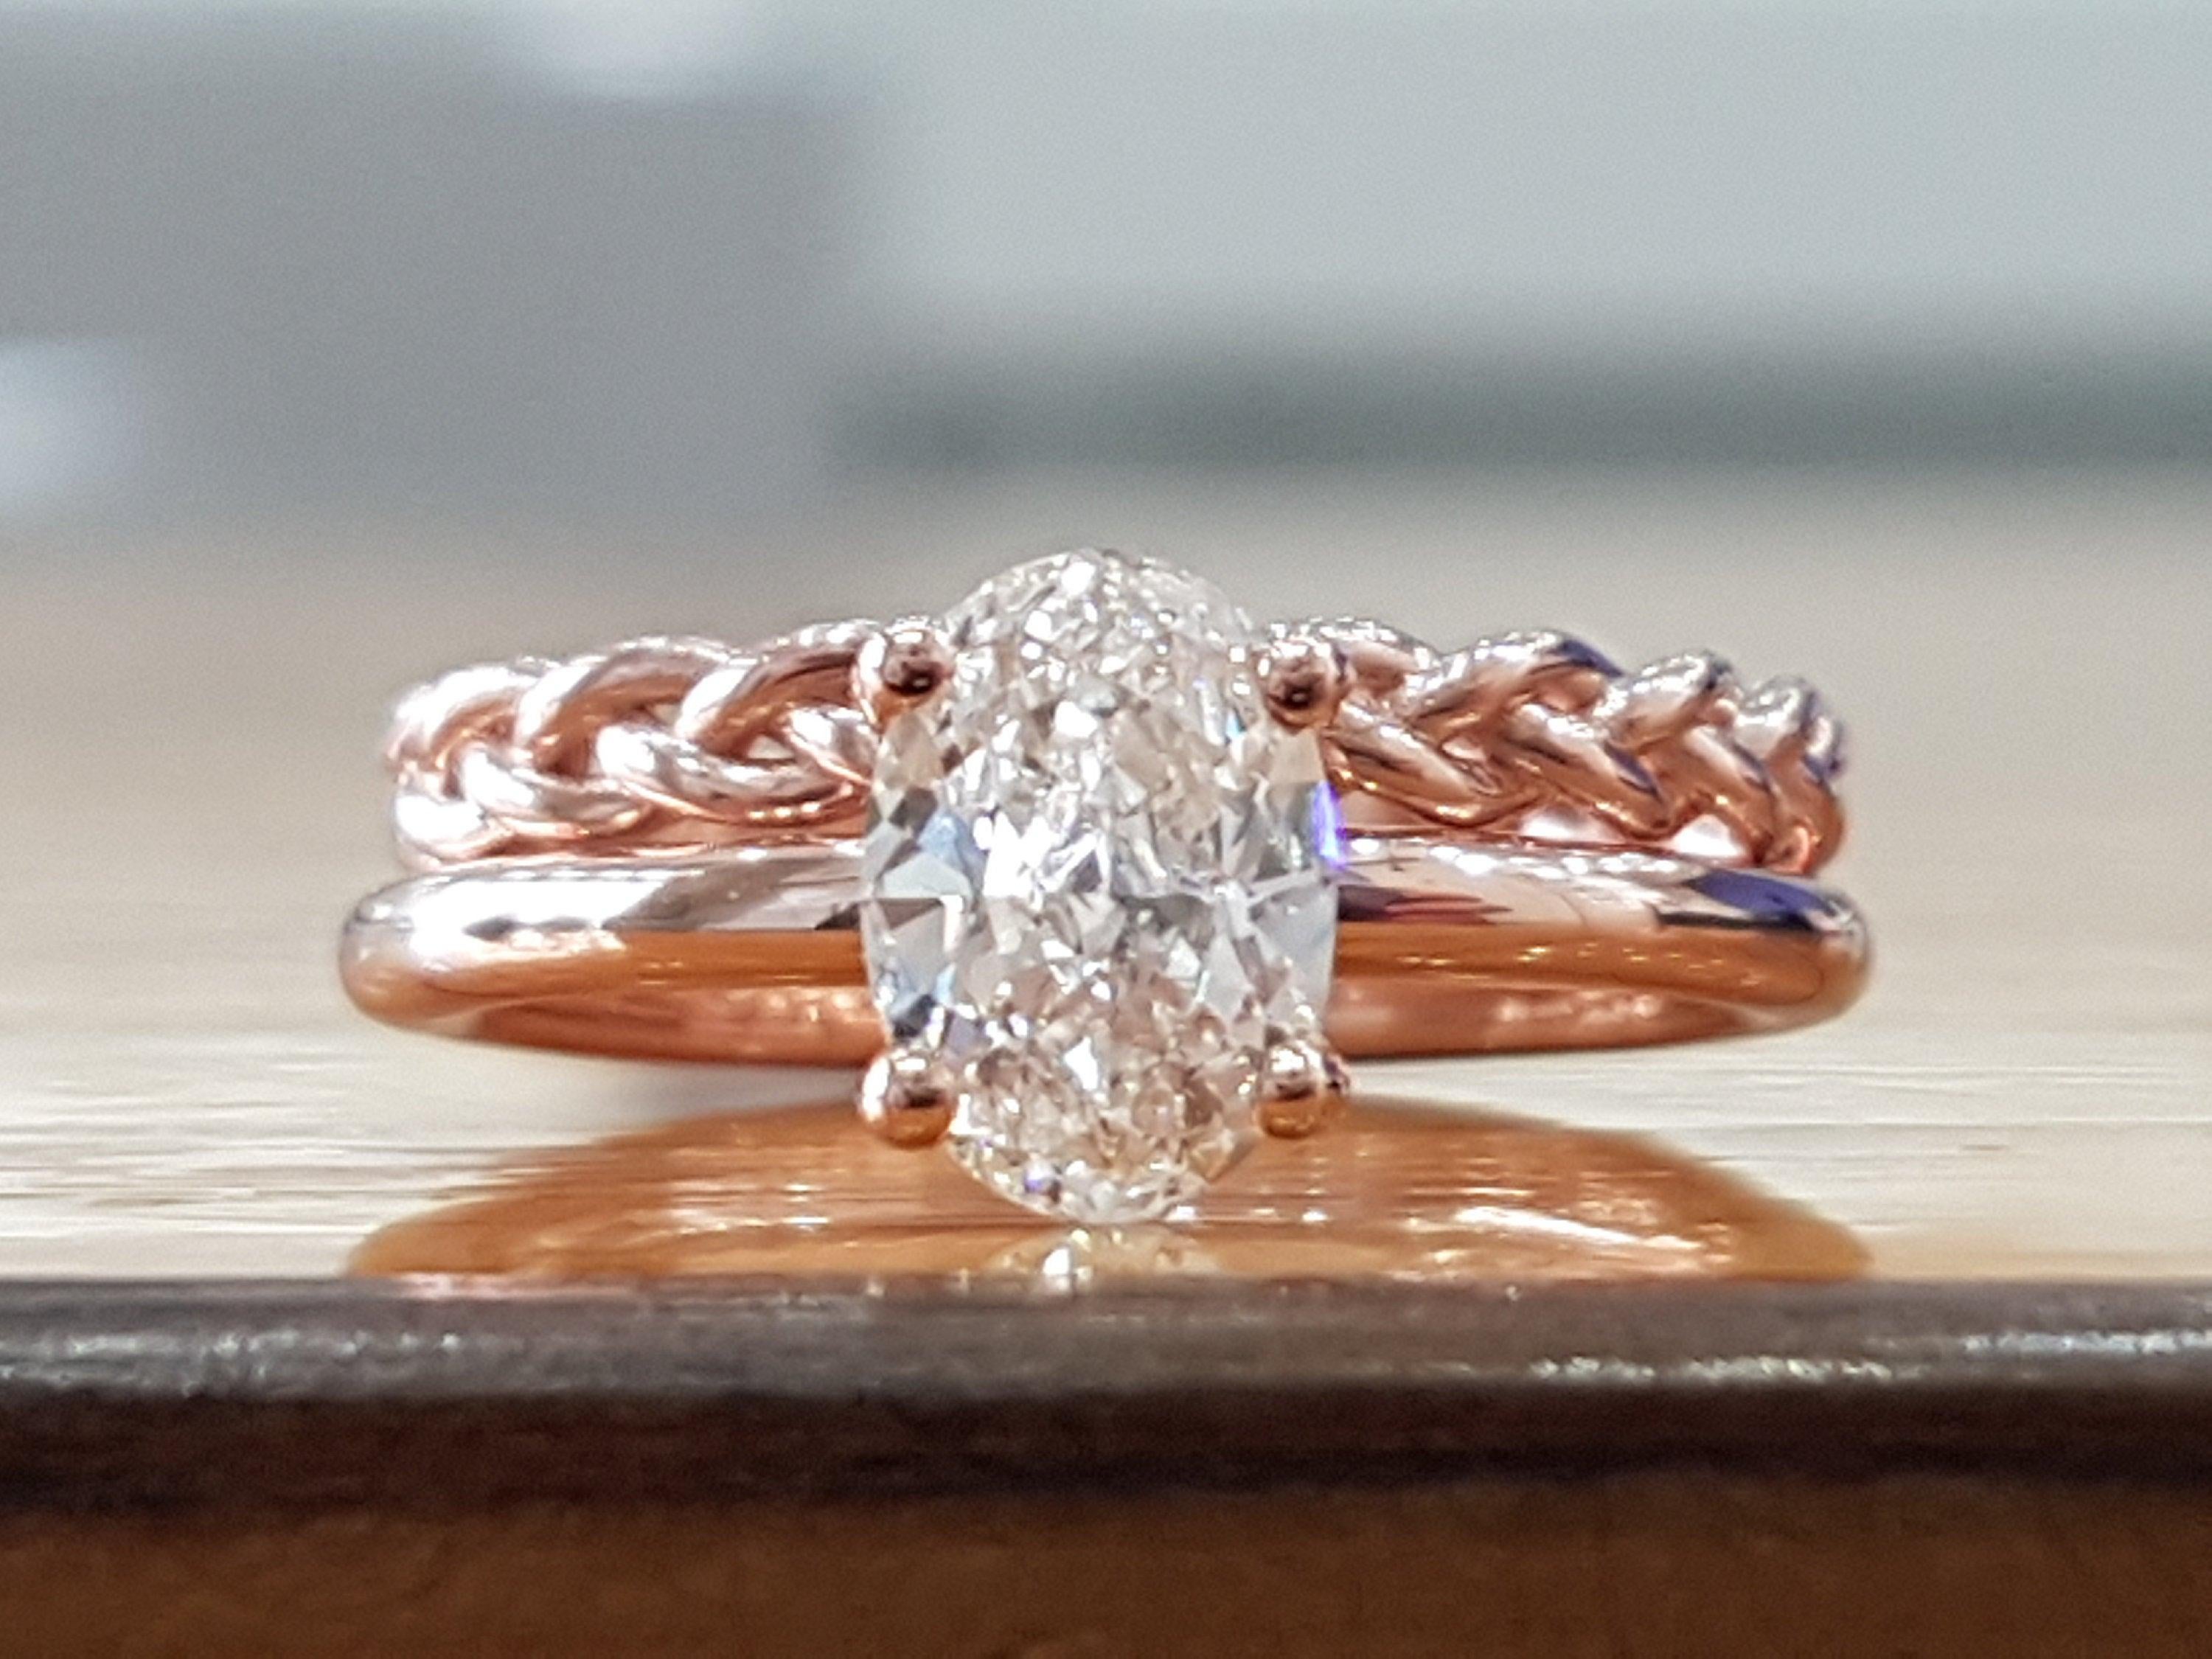 3/4 Carat Rose Gold Engagement Ring, Oval Engagement Ring Set , Oval Cut Engagement Ring,Art Deco Ring, Oval Diamond Engagement Ring
 
 Main Stone Name: Diamond
 Main Stone Weight: 3/4 ct.
 Main Stone Clarity: SI1
 Main Stone Color: H
 Main Stone